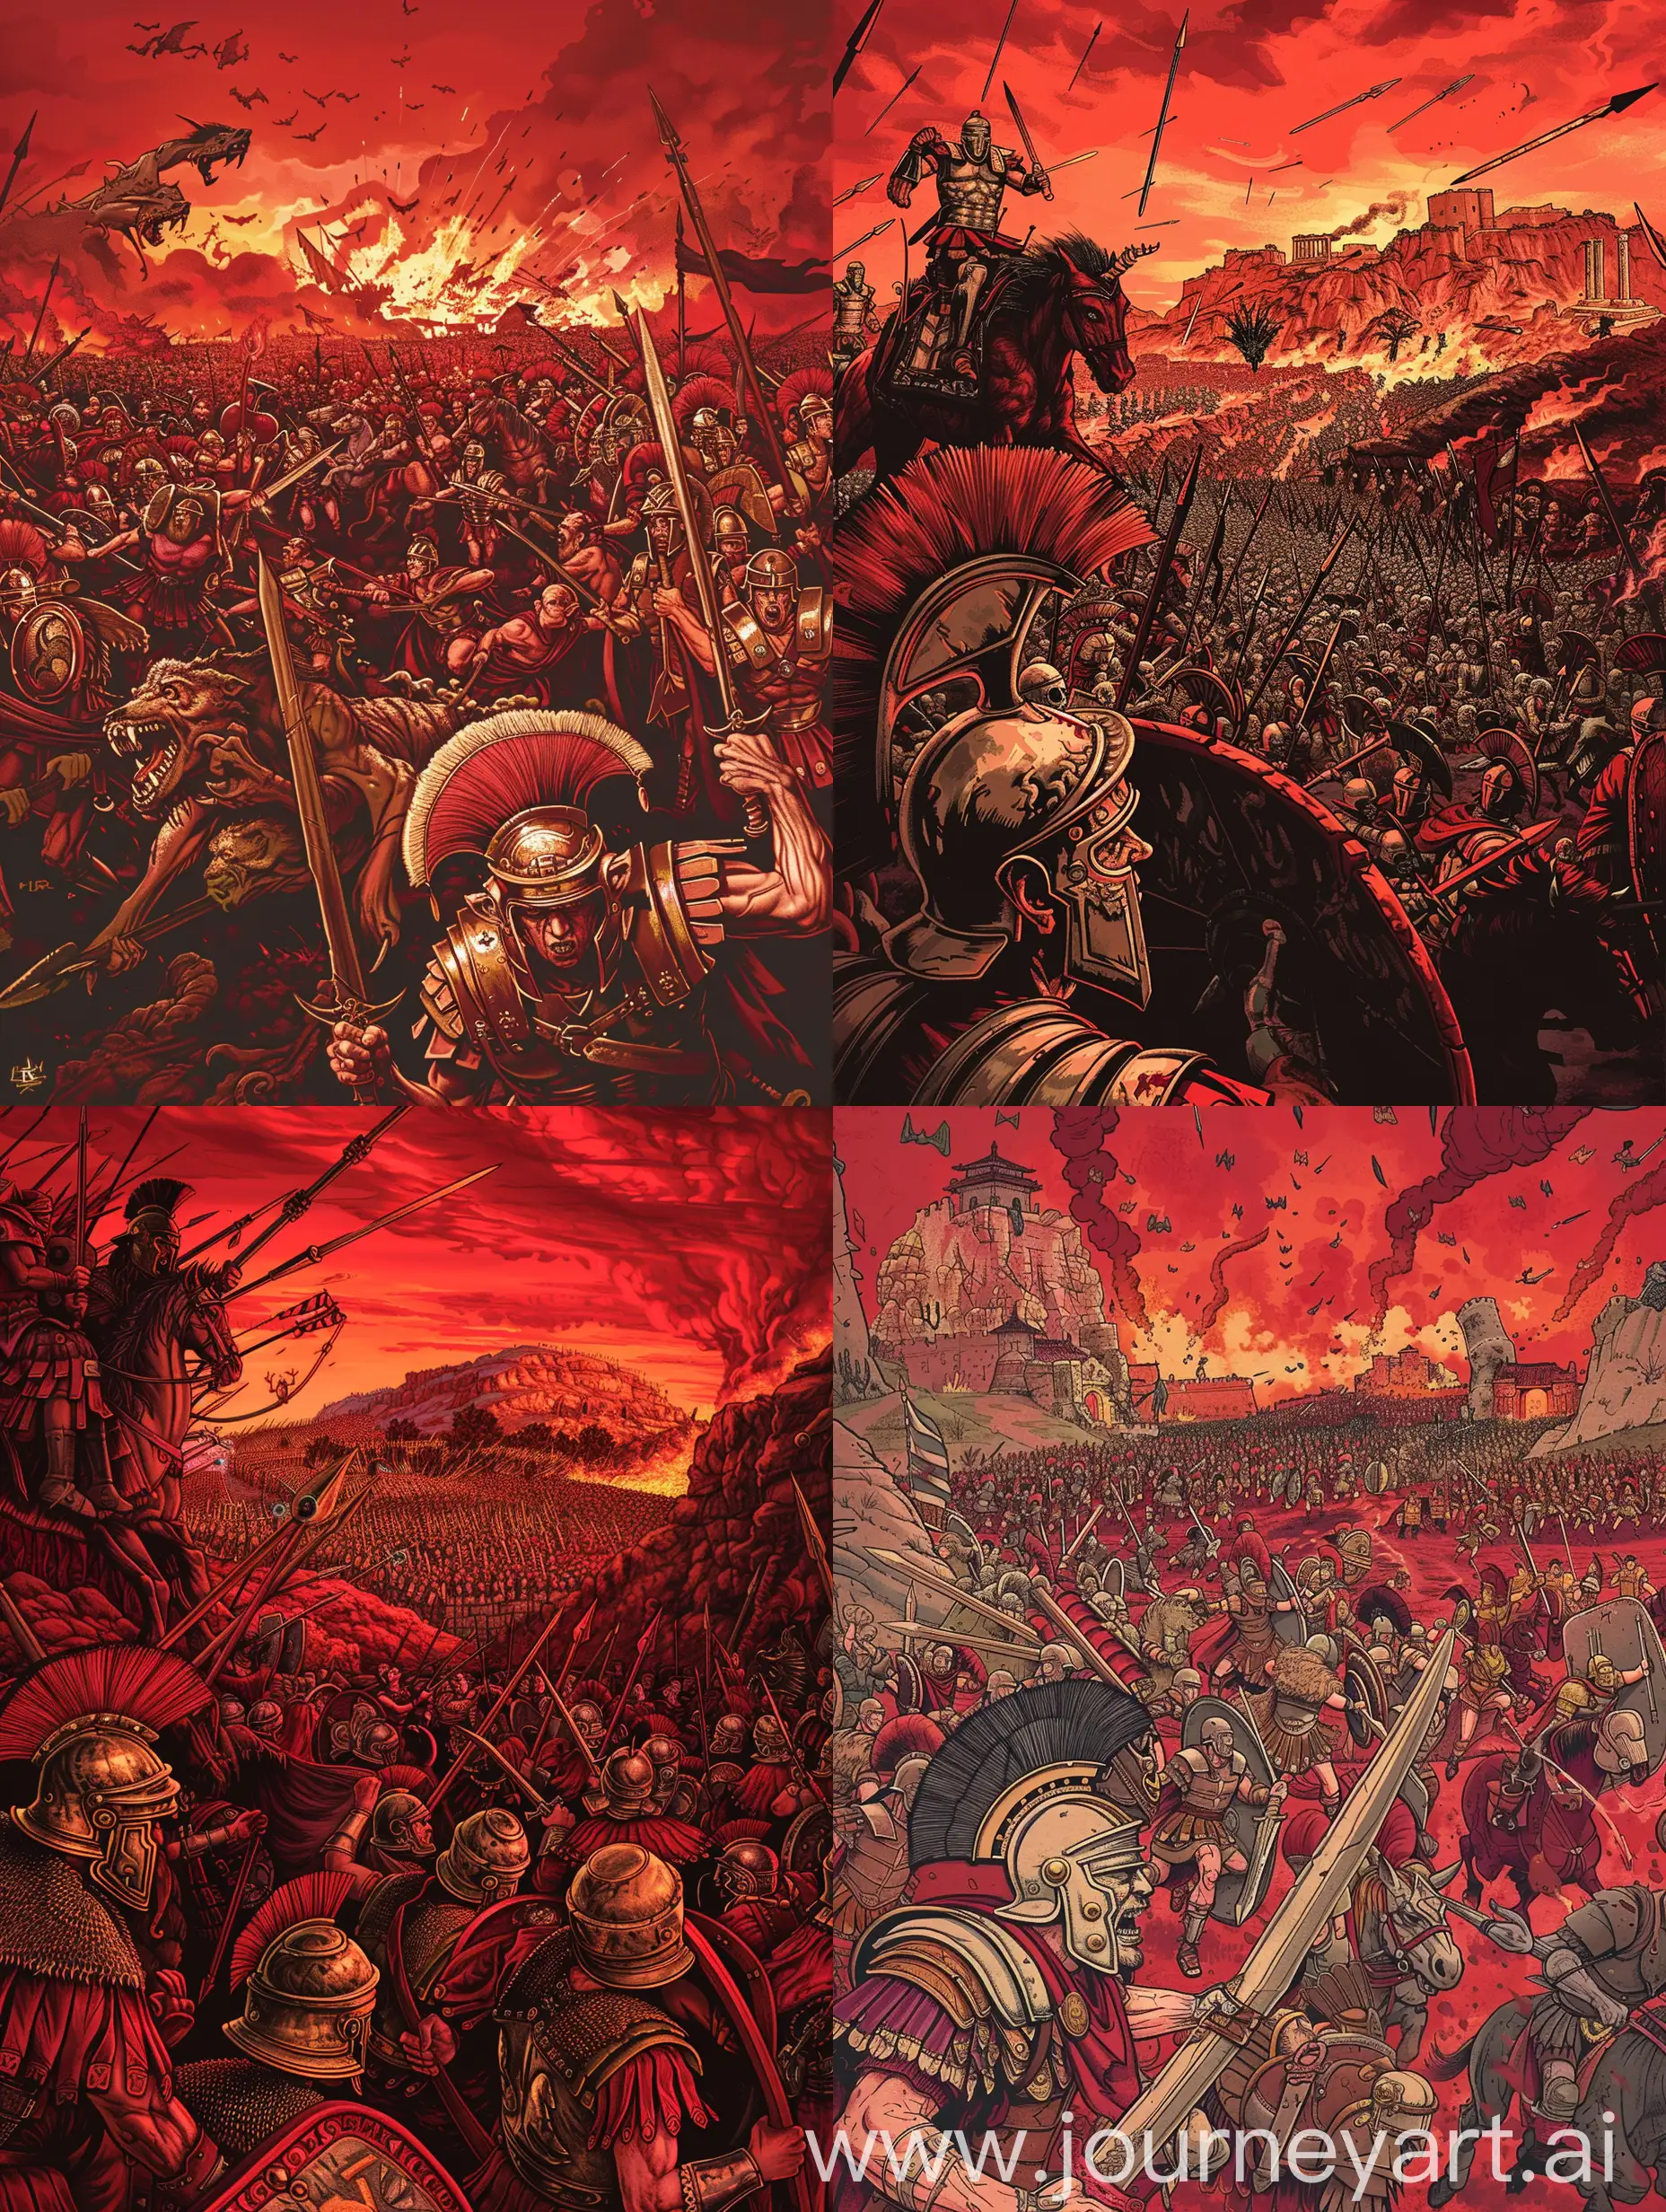 Can you describe and draw a detailed illustration of a fantasy battle scene in which a well-organized and heavily armed Roman legion of approximately 500 soldiers, including centurions, infantry and cavalry, is engaged in a fierce battle against a horde of evil and chaotic goblins, whose number is estimated at approximately 2000 people? a number depicted against a red sky with a fiery landscape in the background, using red as the main color for the illustration, showing the bravery, strategy and fighting prowess of the Roman soldiers in their encounter with the goblin horde?